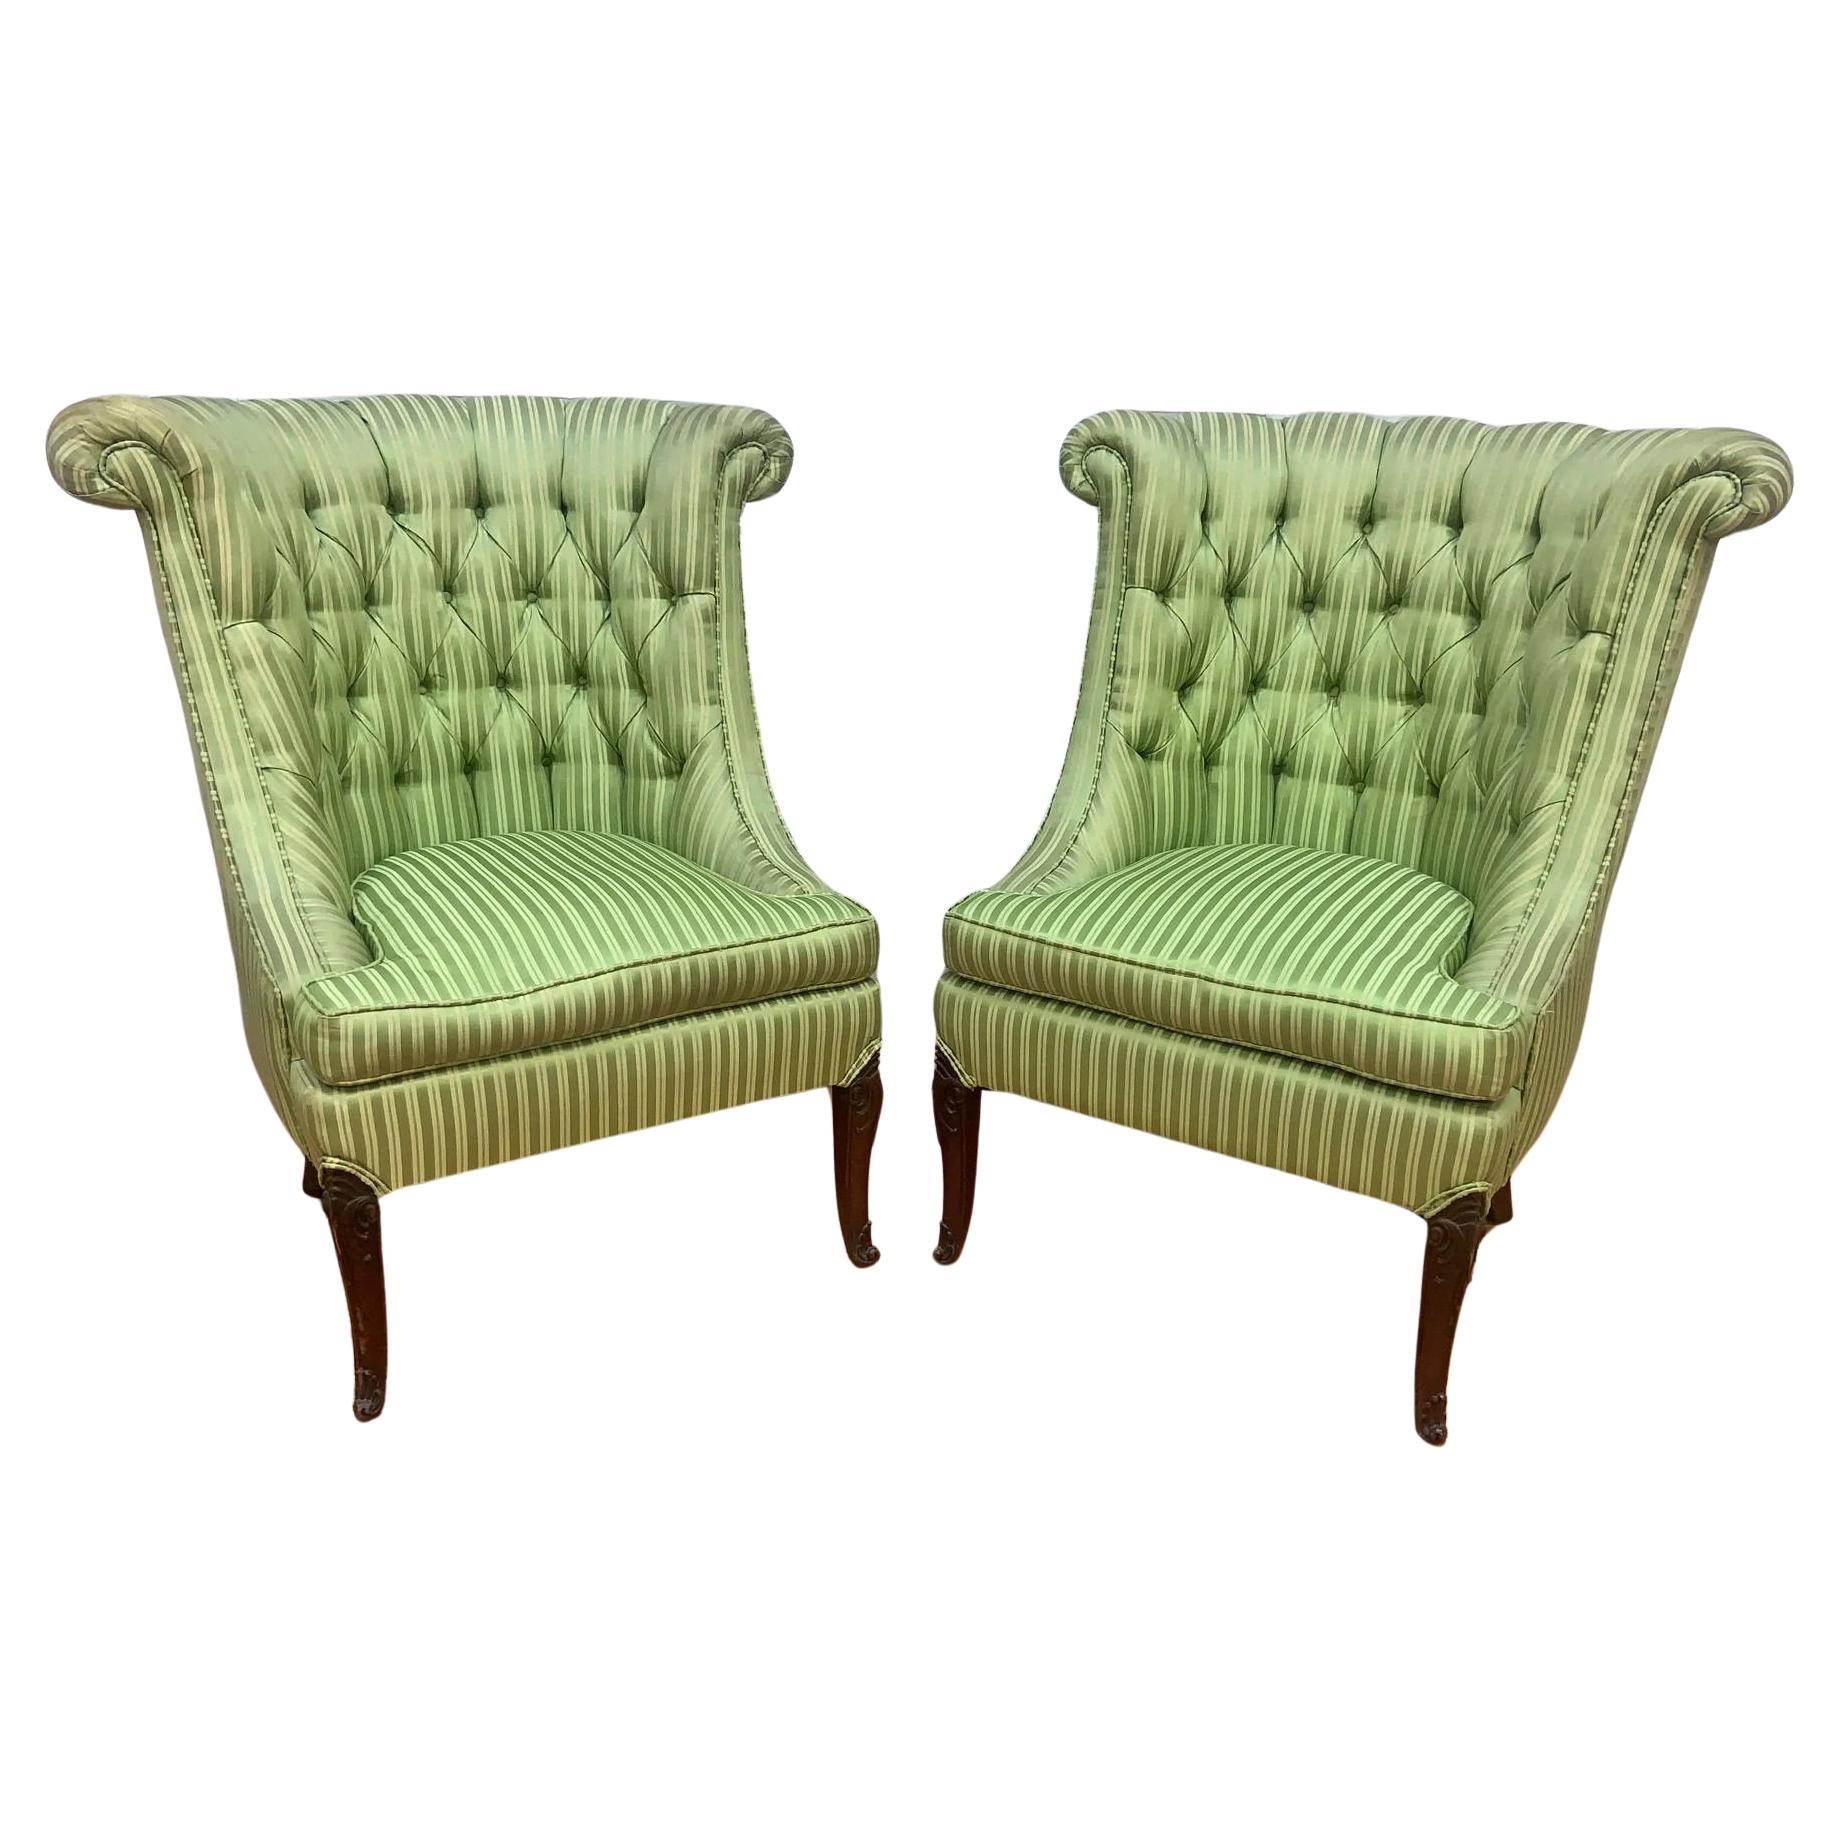 Vintage Queen Anne Style Rolled Back Tufted Wingback Chairs - Pair